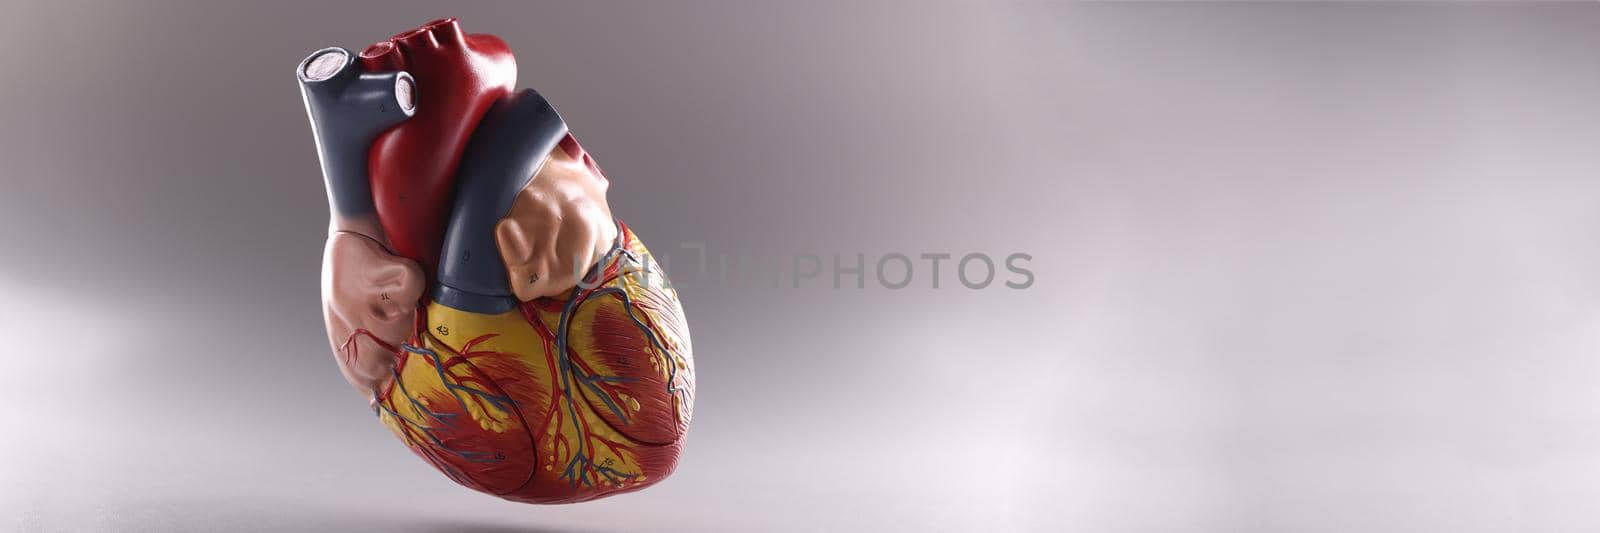 Human heart, anatomical medical model floating in air on grey background by kuprevich